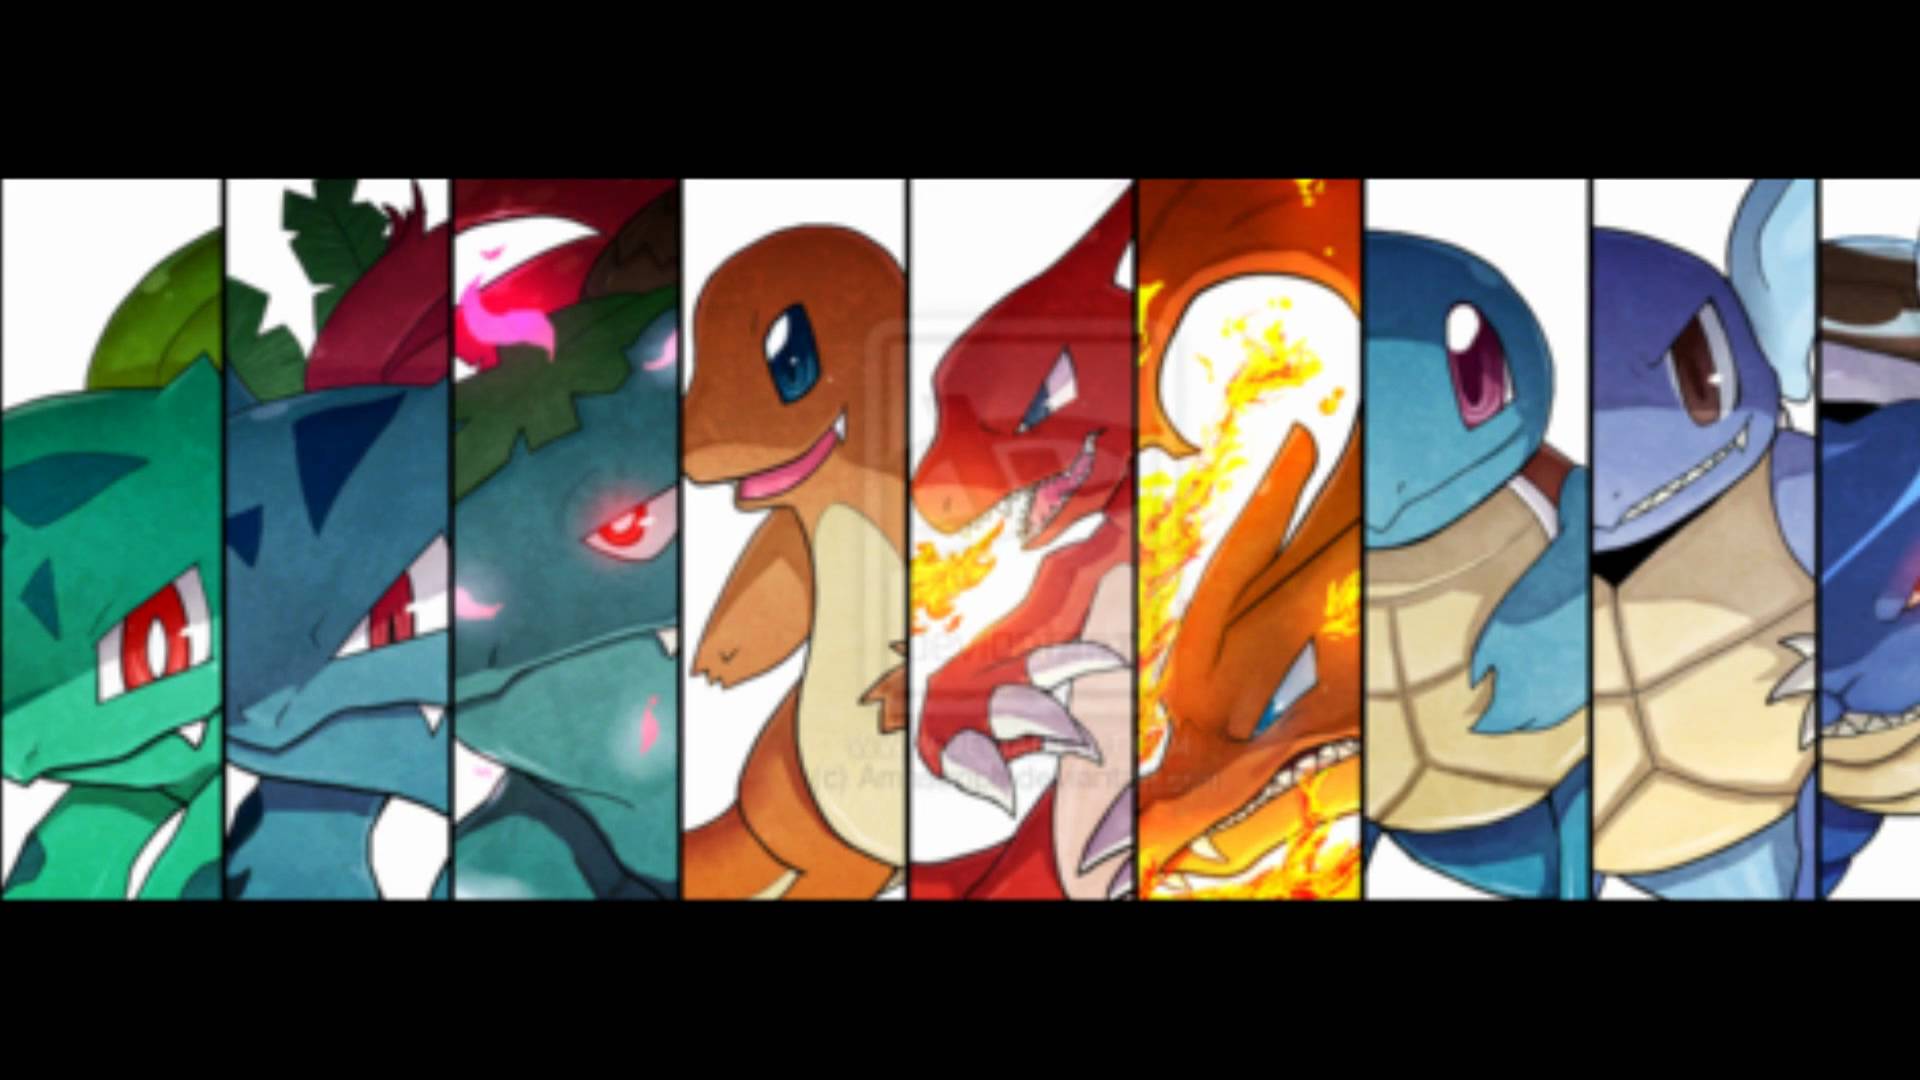 Pokemon Red Vs Gold Wallpapers Wallpaper Cave Images, Photos, Reviews